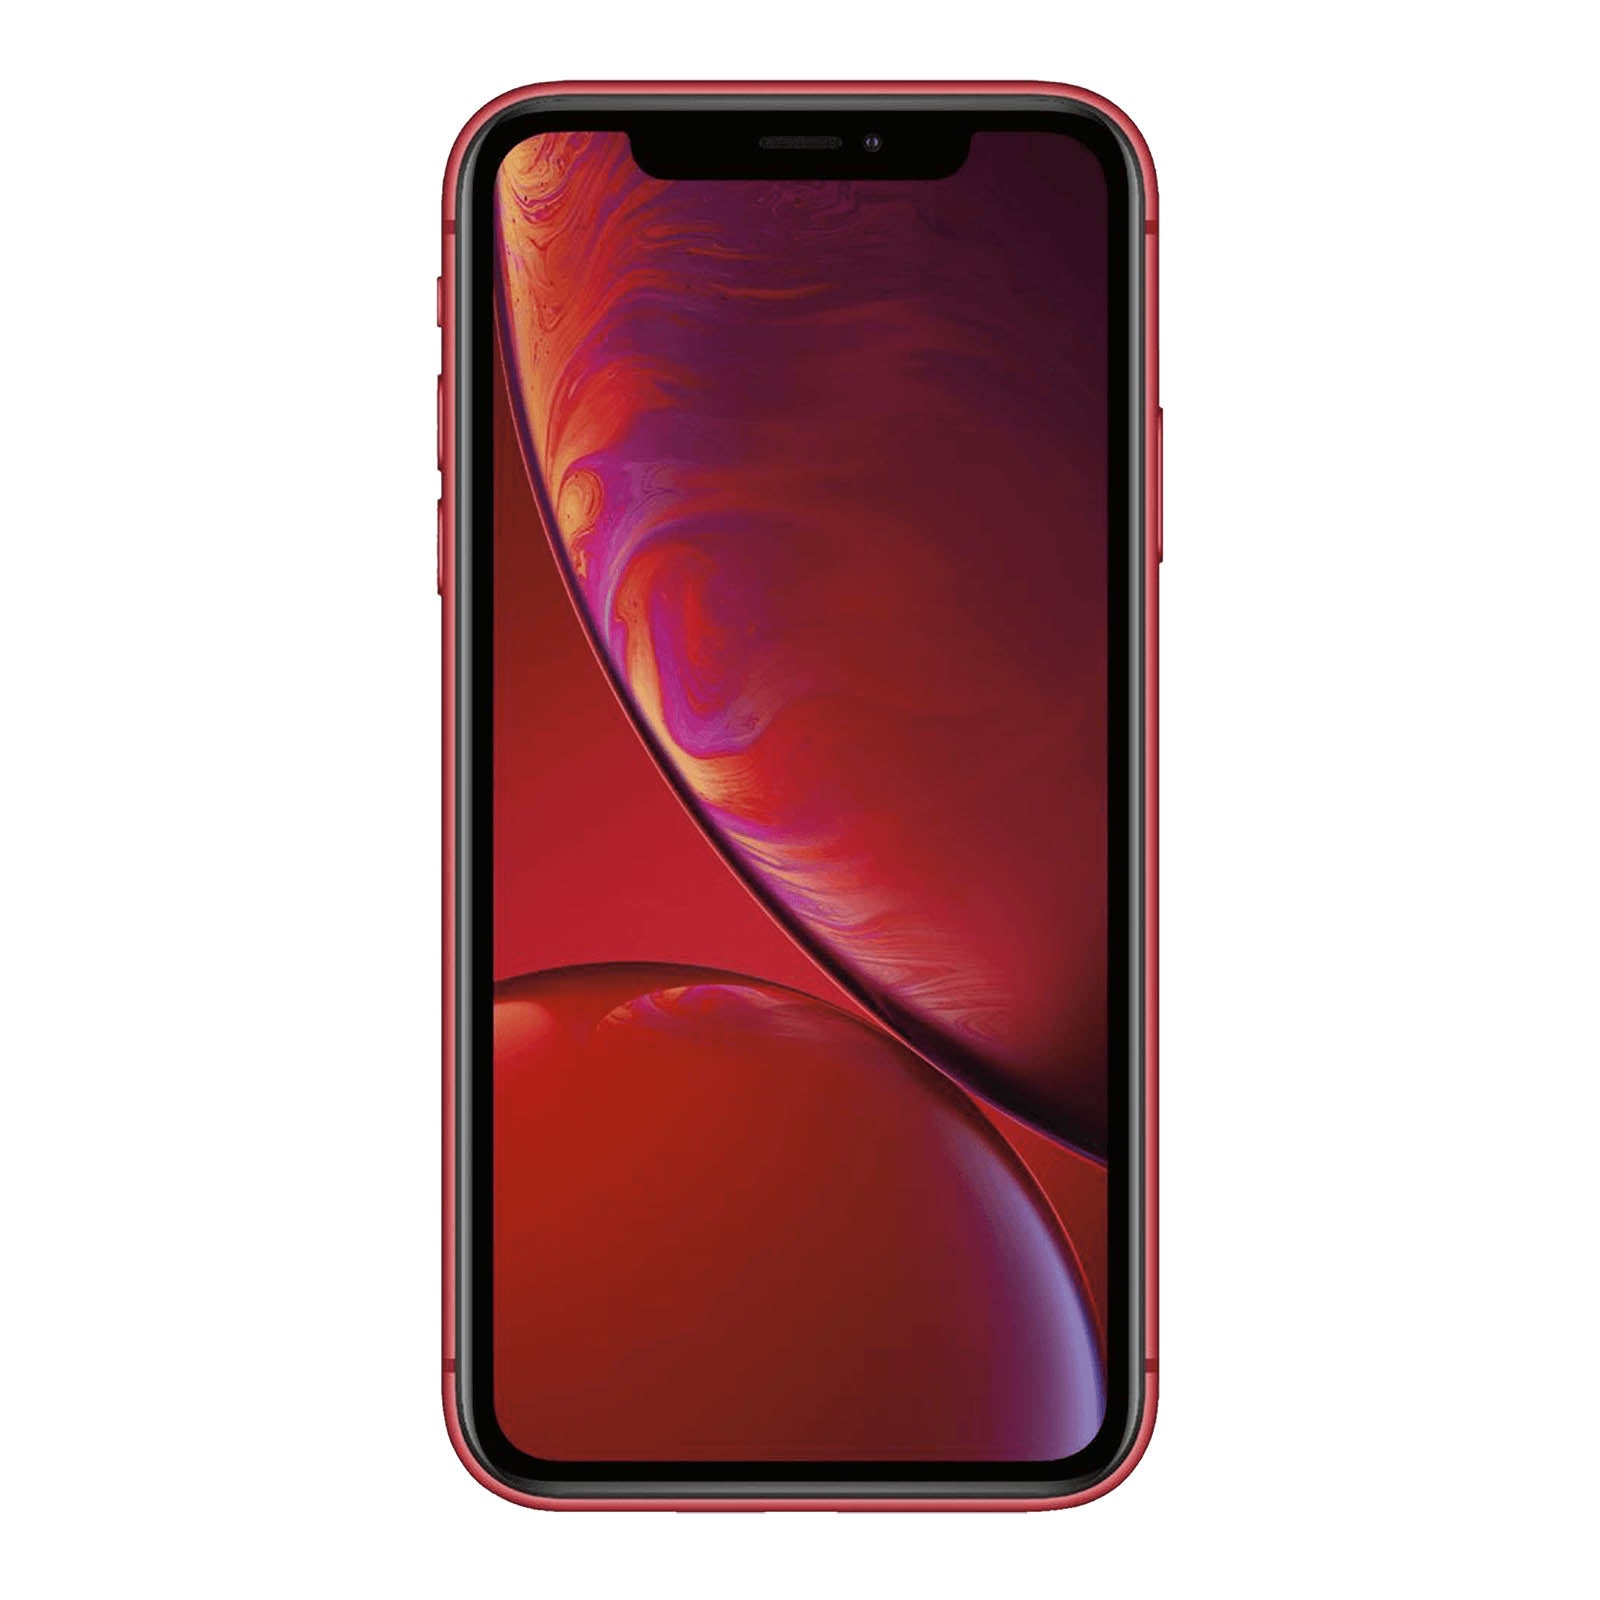 Apple iPhone XR 64GB Product Red Good - AT&T